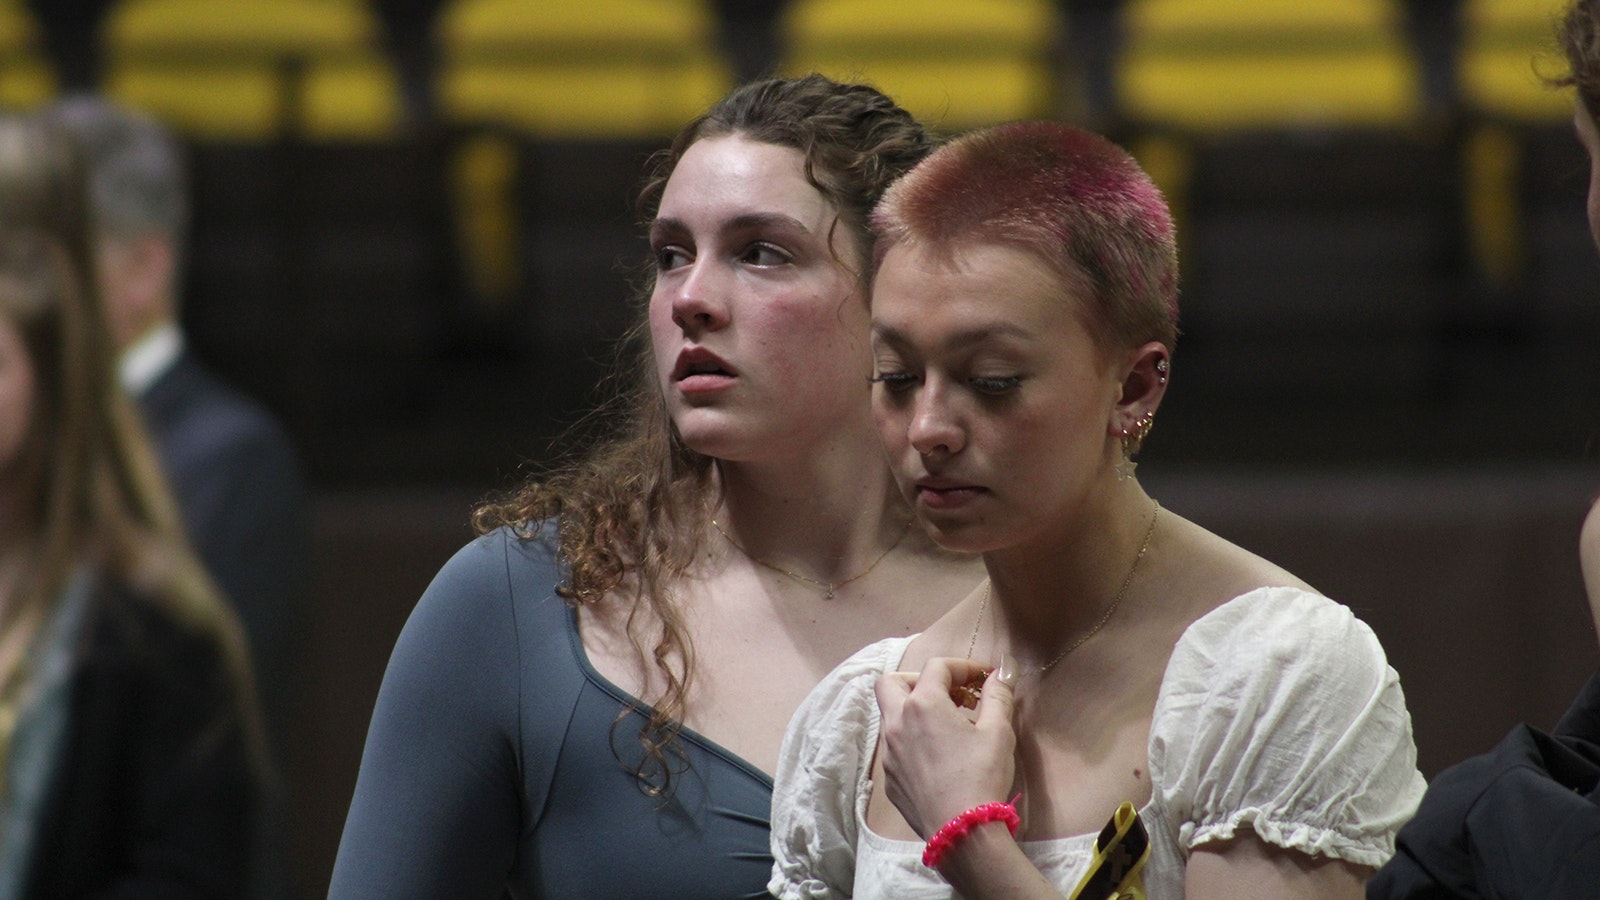 University of Wyoming women's swim team members Sydney Metzler, left, and Sydney McKenzie at a Wednesday memorial service for three teammates who died in a car crash Feb. 22, 2024.